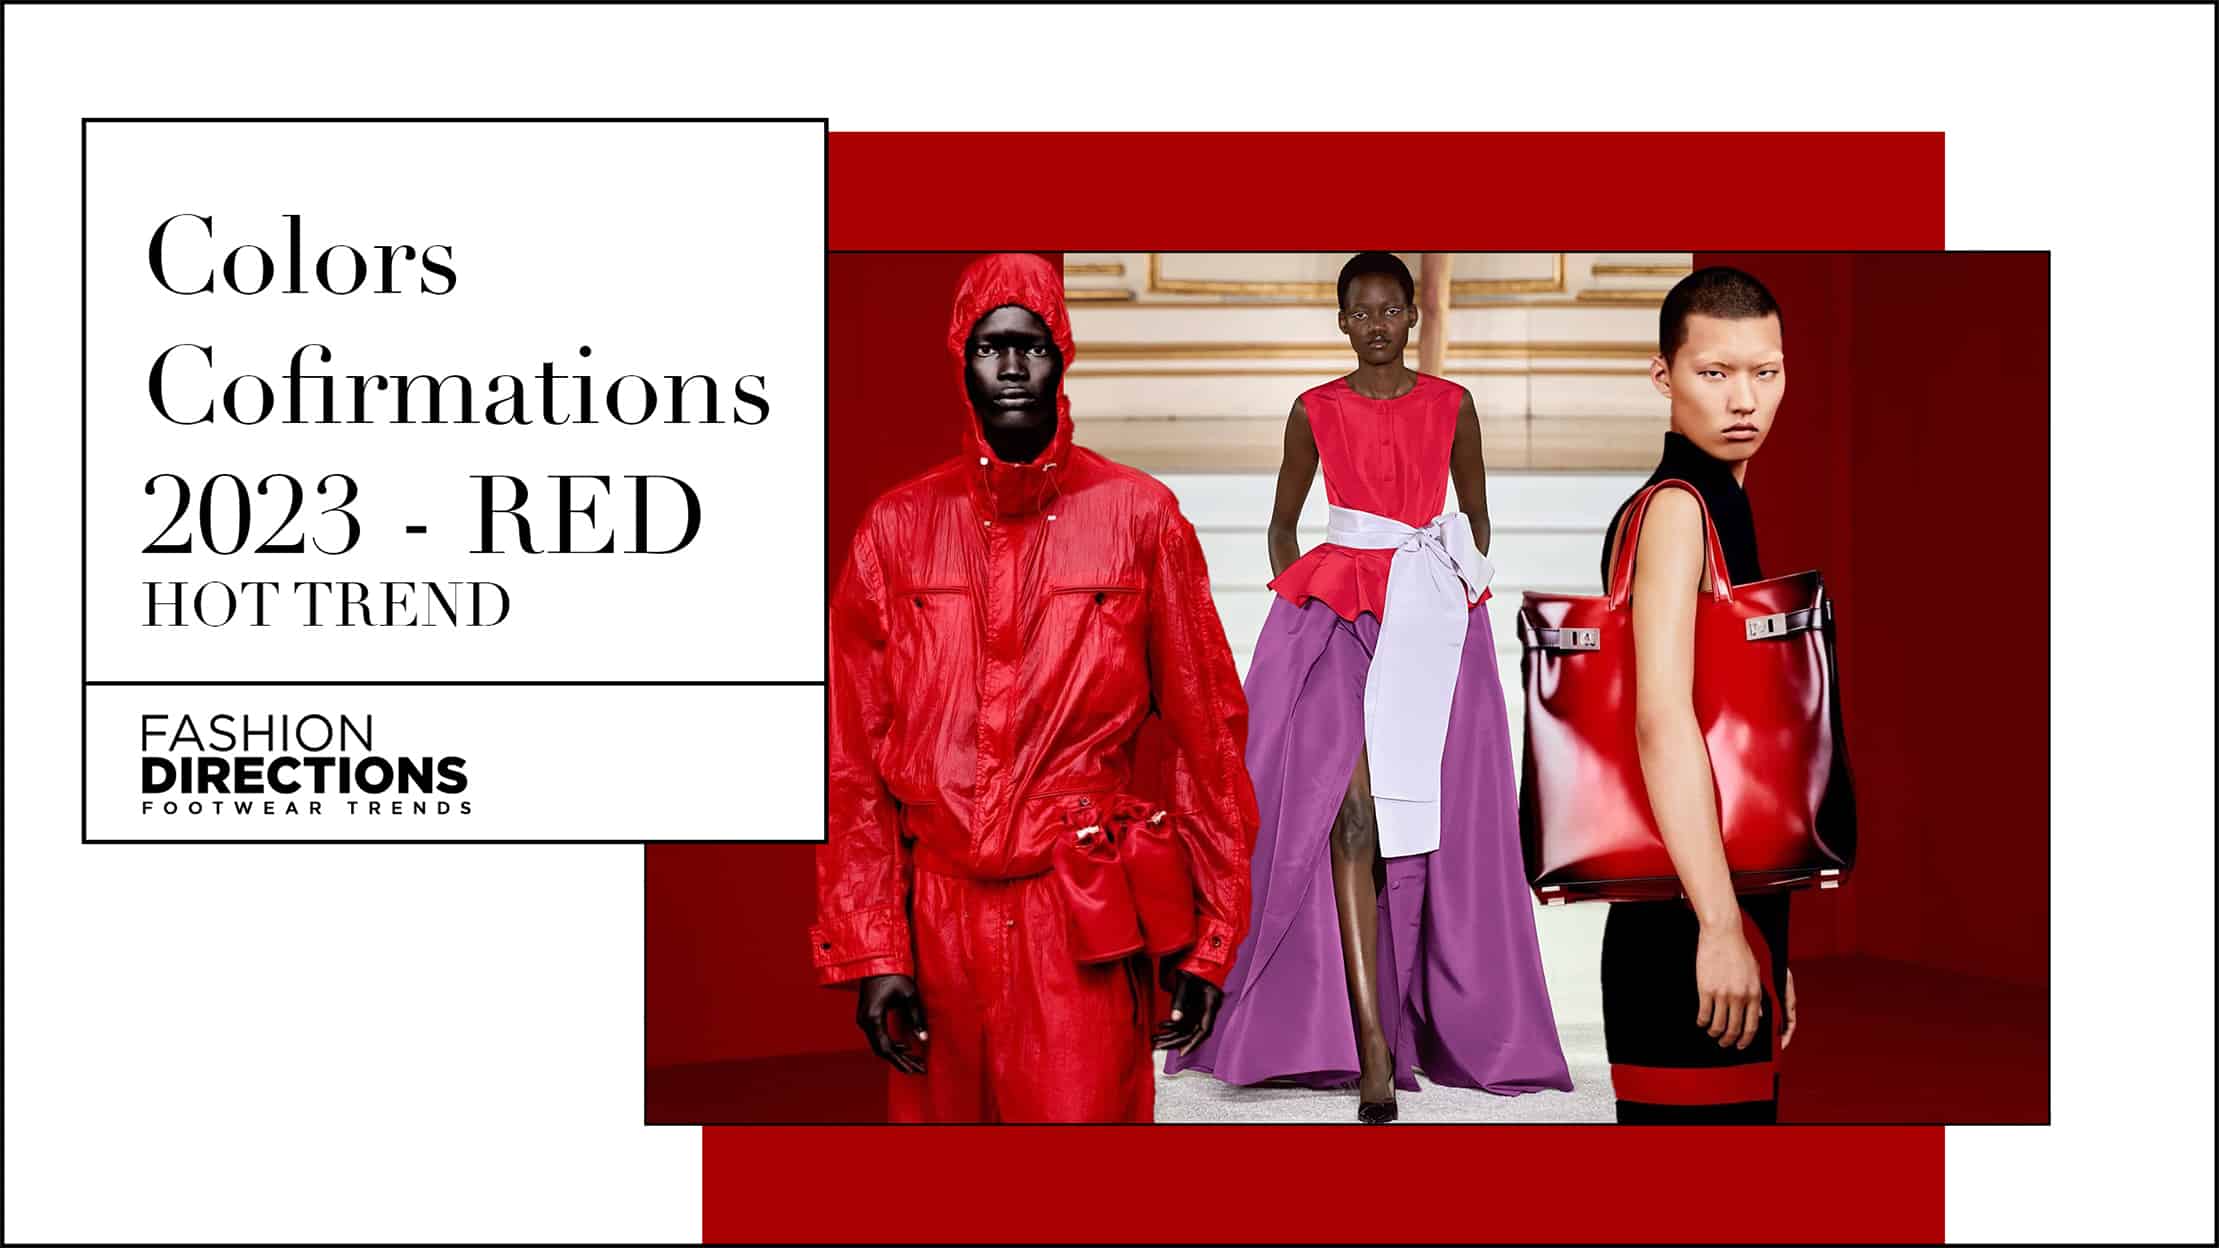 RED HOT TREND COLORS CONFIRMATIONS 2023 1